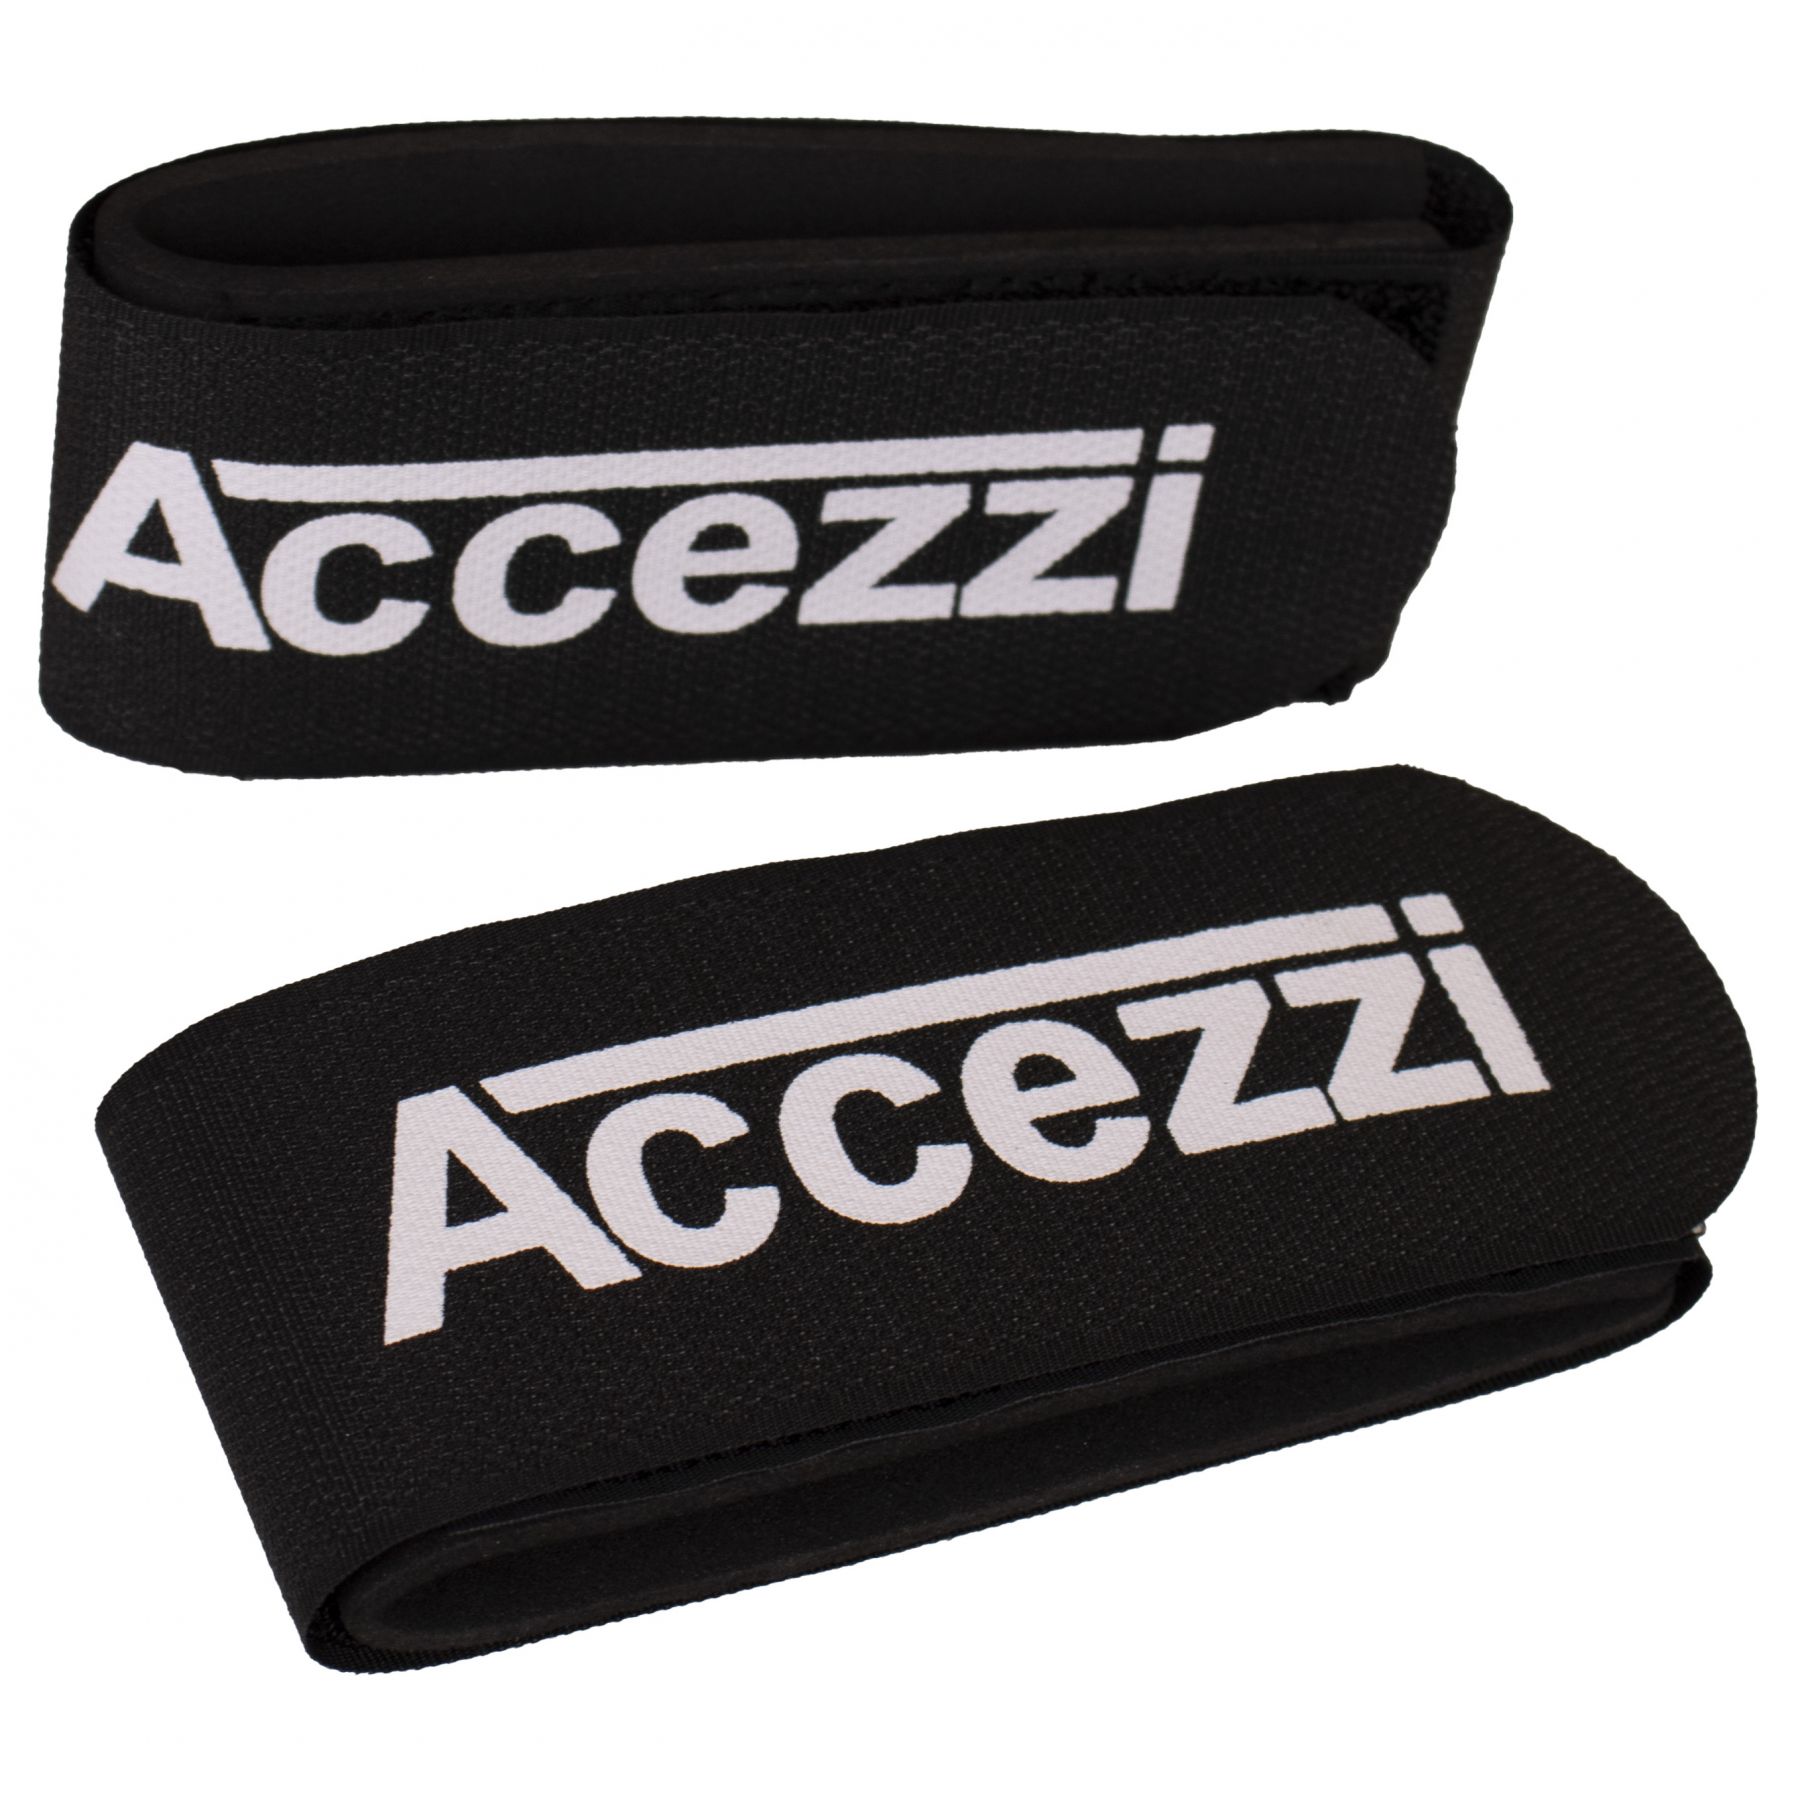 Accezzi skiclips carving ski